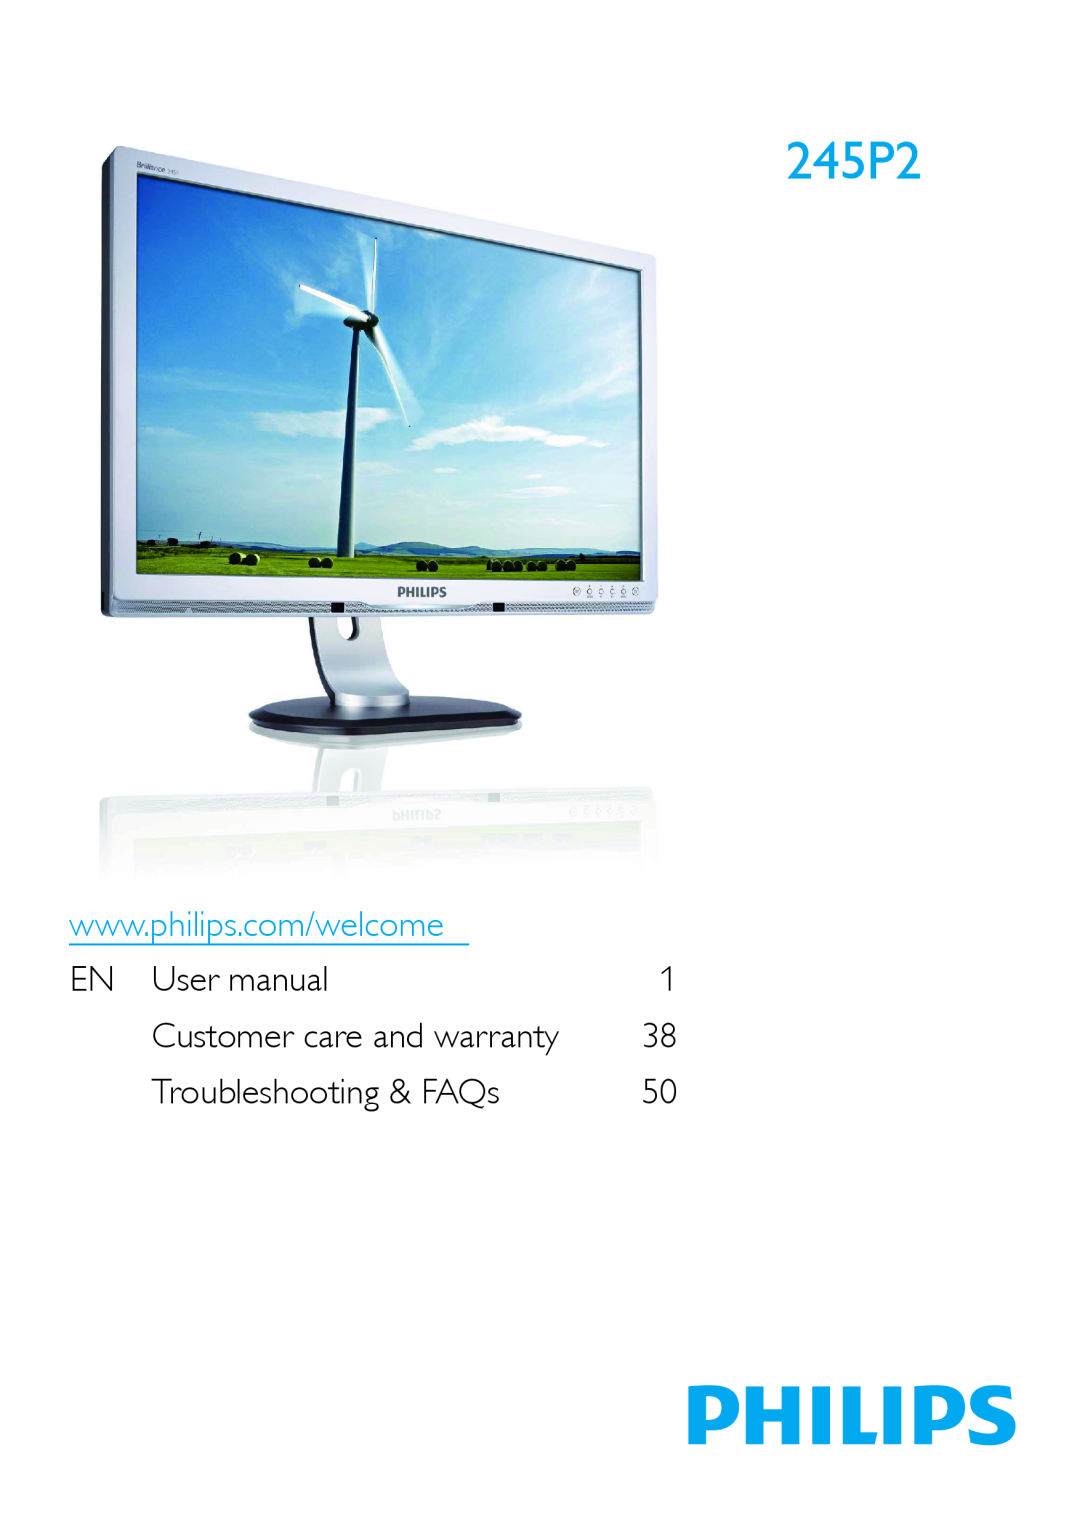 Philips 245P2 user manual EN User manual, Troubleshooting & FAQs, Customer care and warranty 